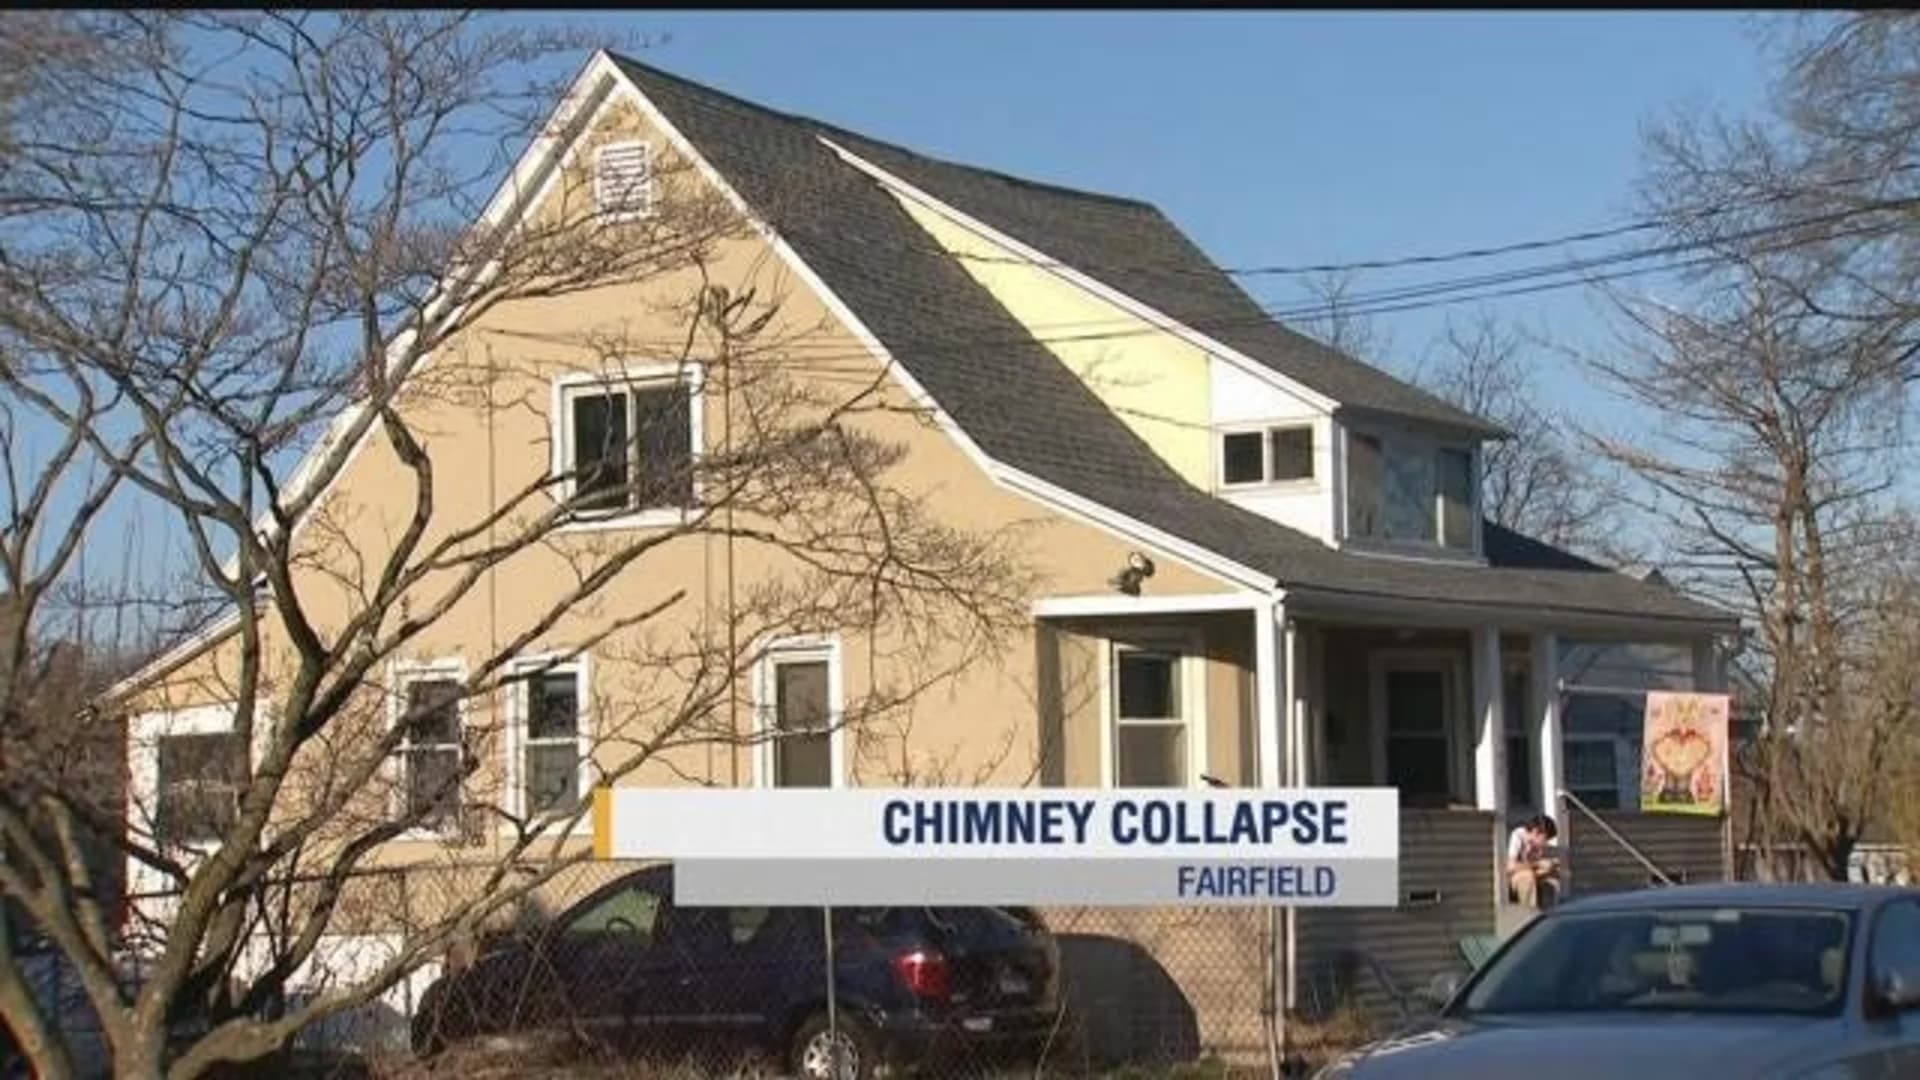 Officials: Chimney collapses off home in Fairfield